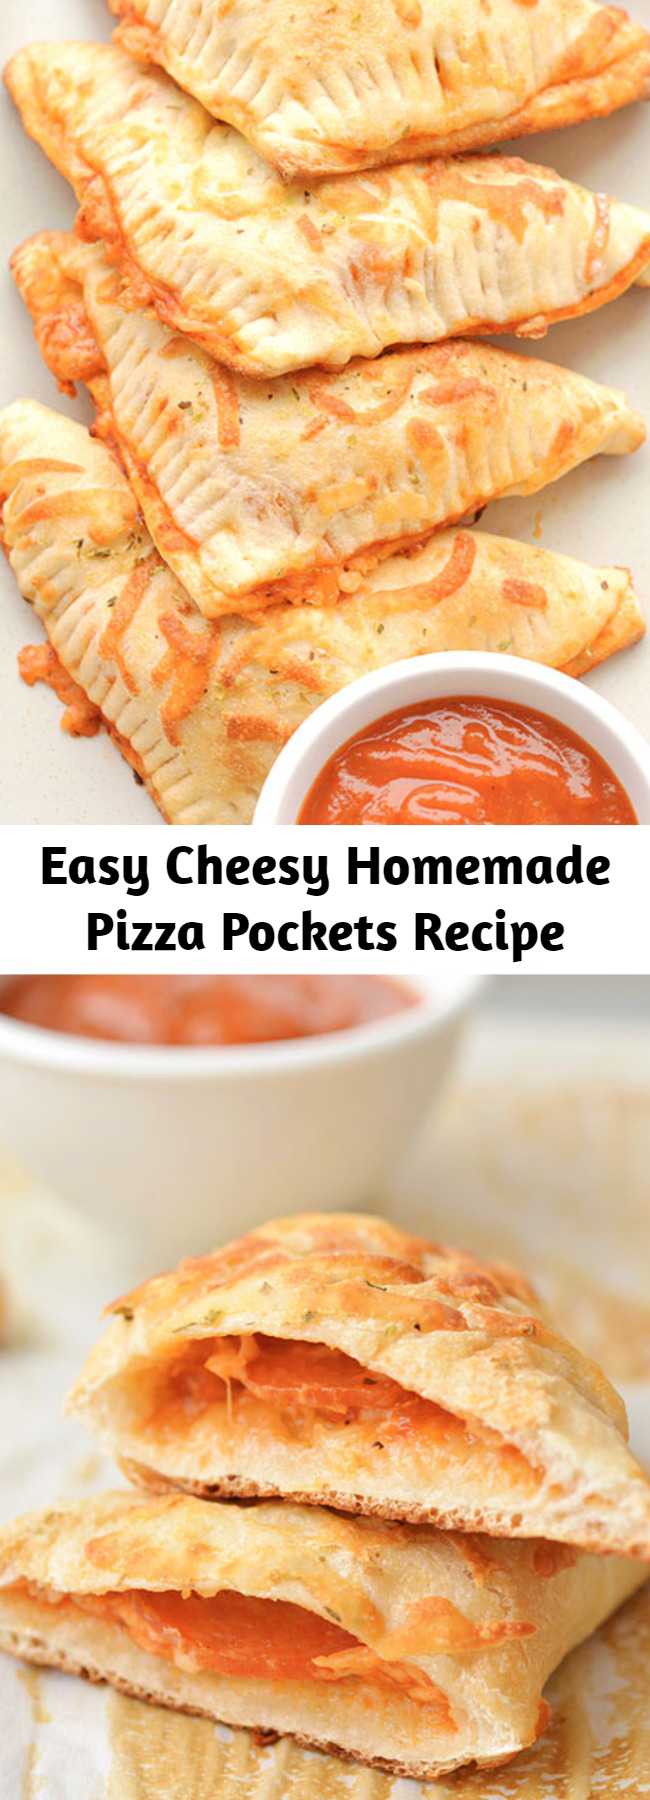 Easy Cheesy Homemade Pizza Pockets Recipe - These easy cheesy homemade pizza pockets are SO EASY and they taste amazing! You can load them with your favourite pizza toppings and in less than 20 minutes you have a fun, delicious and kid friendly meal! They're great for lunch or dinner and best of all, they're kid approved!